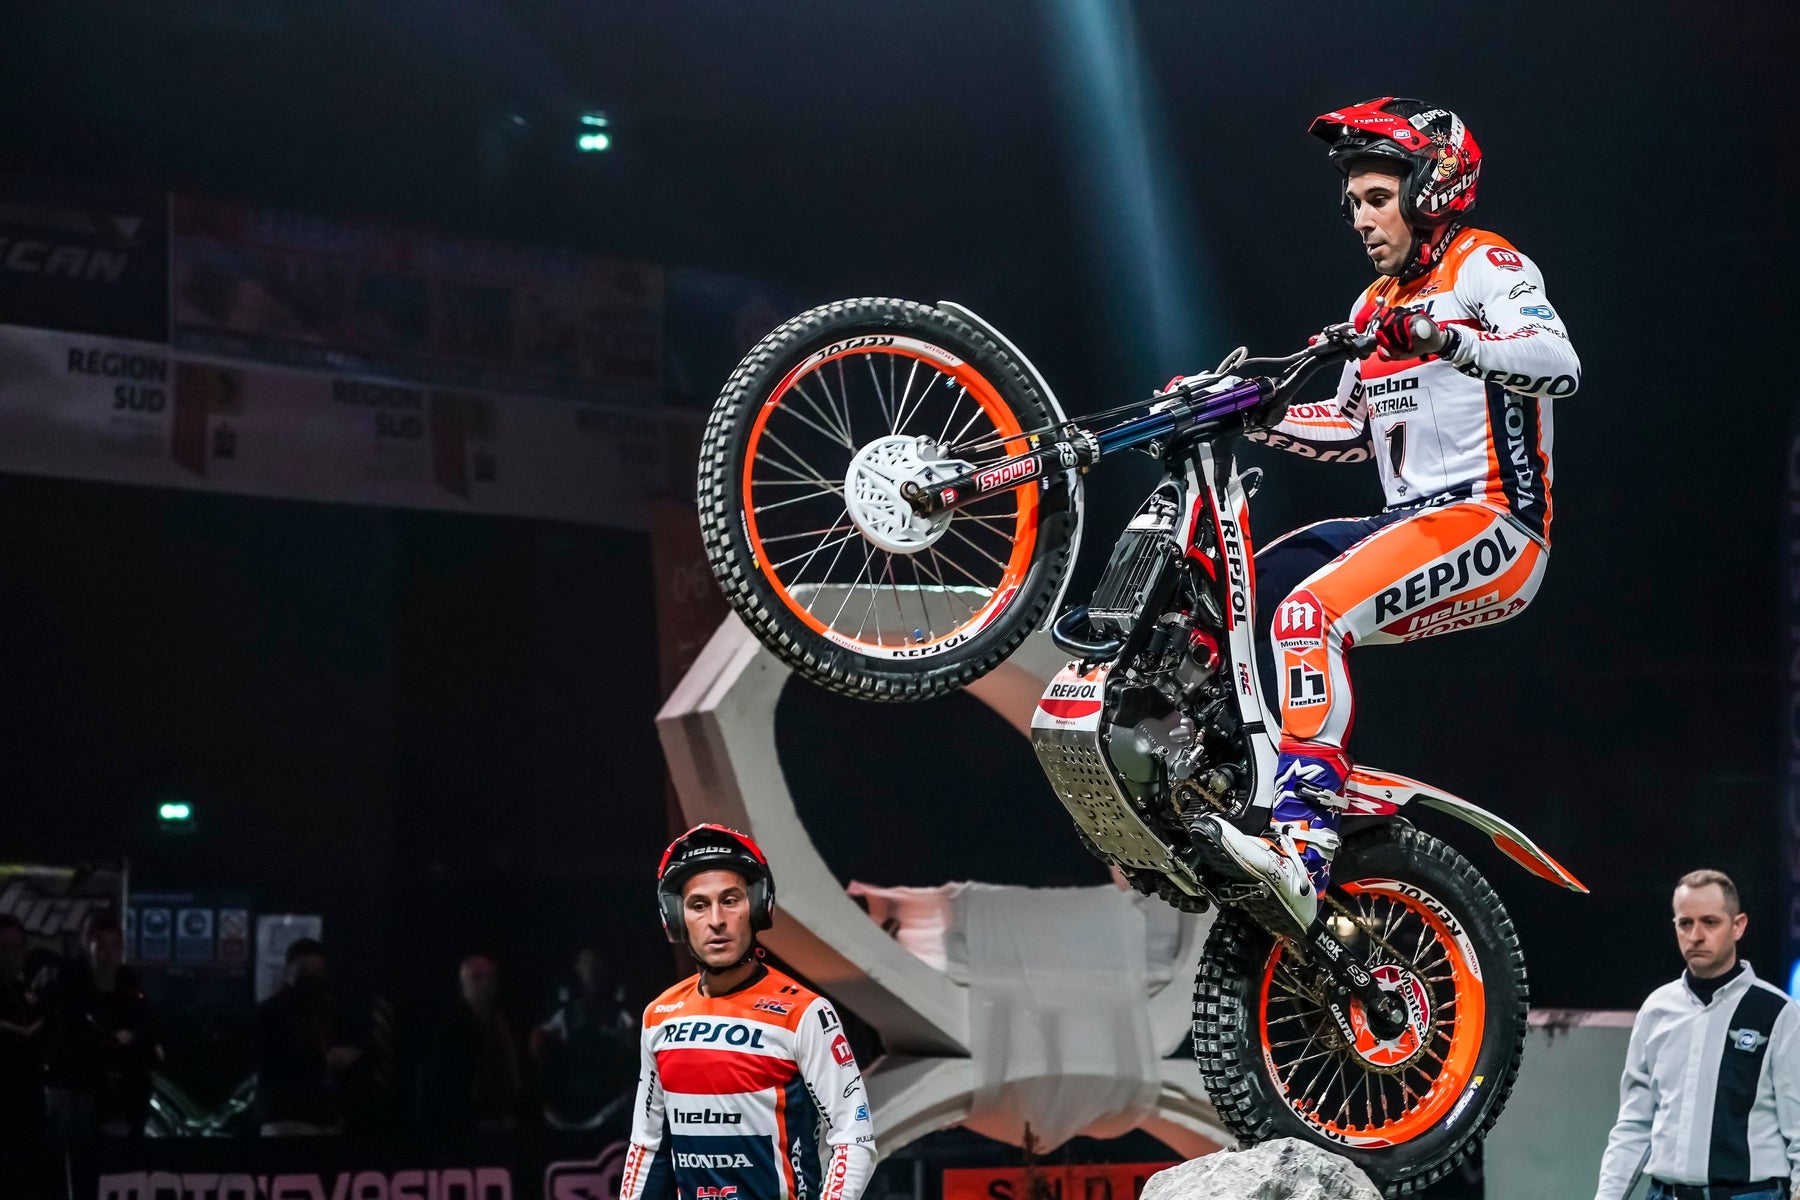 TONI BOU KICKS OFF 2022 X-TRIAL WORLD CHAMPIONSHIP WITH A COMMANDING WIN IN NICE, FRANCE